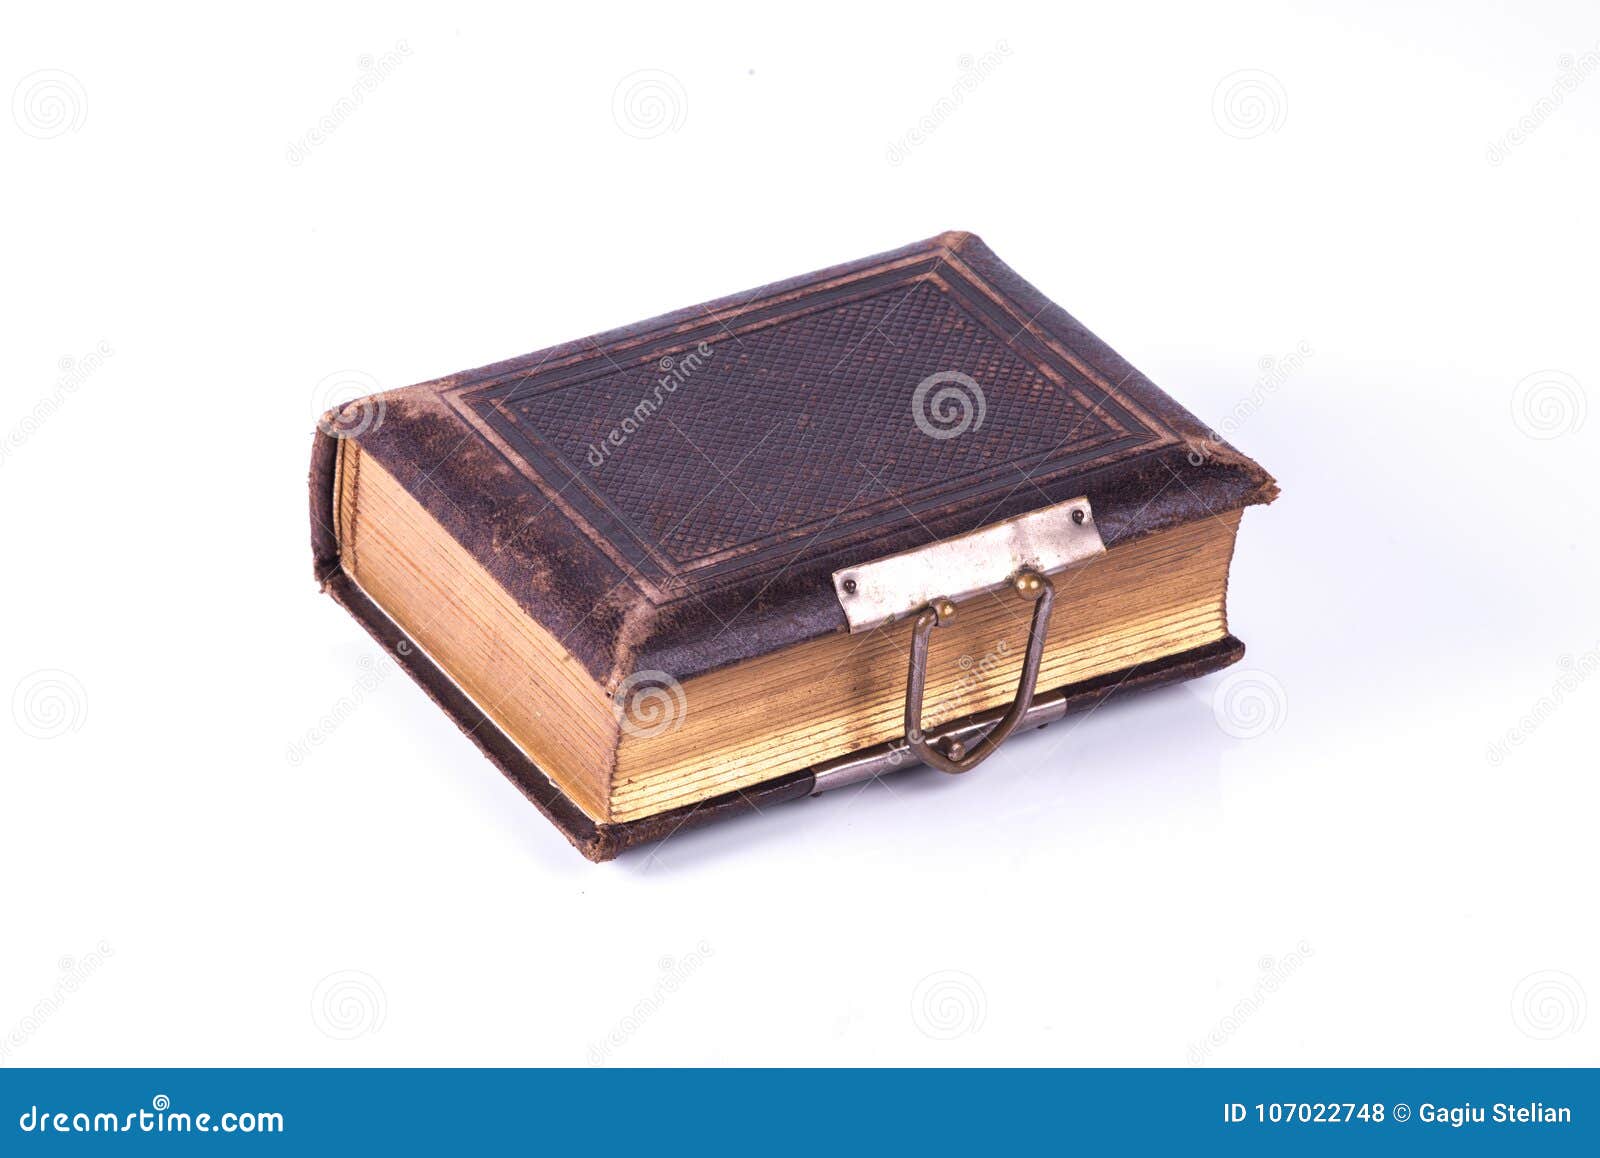 old handcrafted book with lock sistem